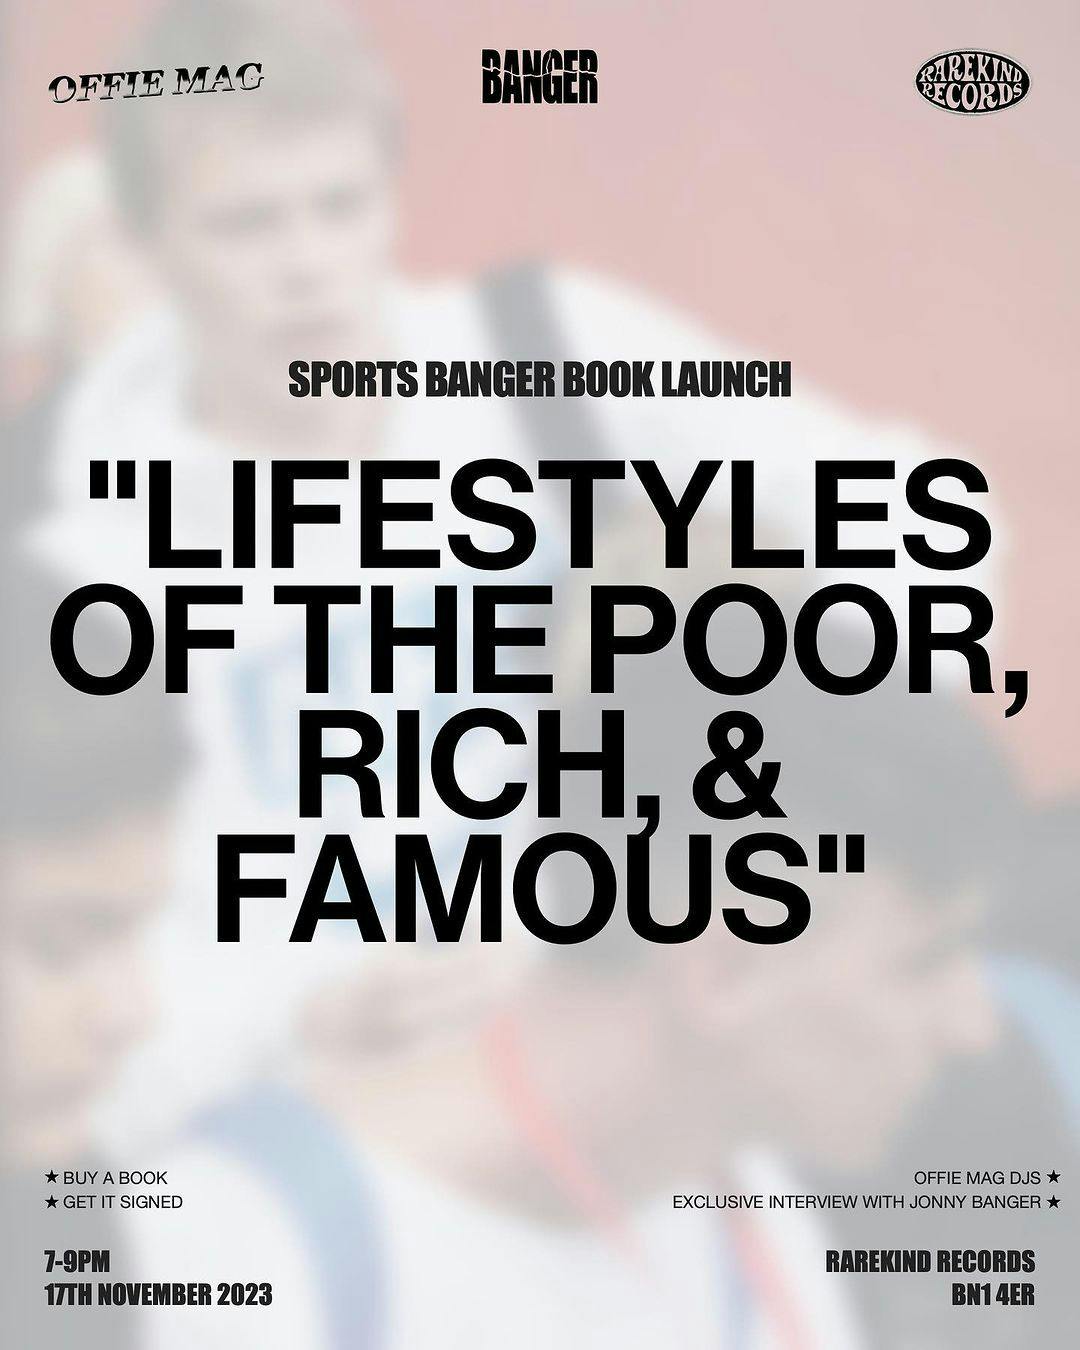 OFFIE MAG X SPORTS BANGER "LIFESTYLES OF THE POOR, RICH & FAMOUS" Book Launch